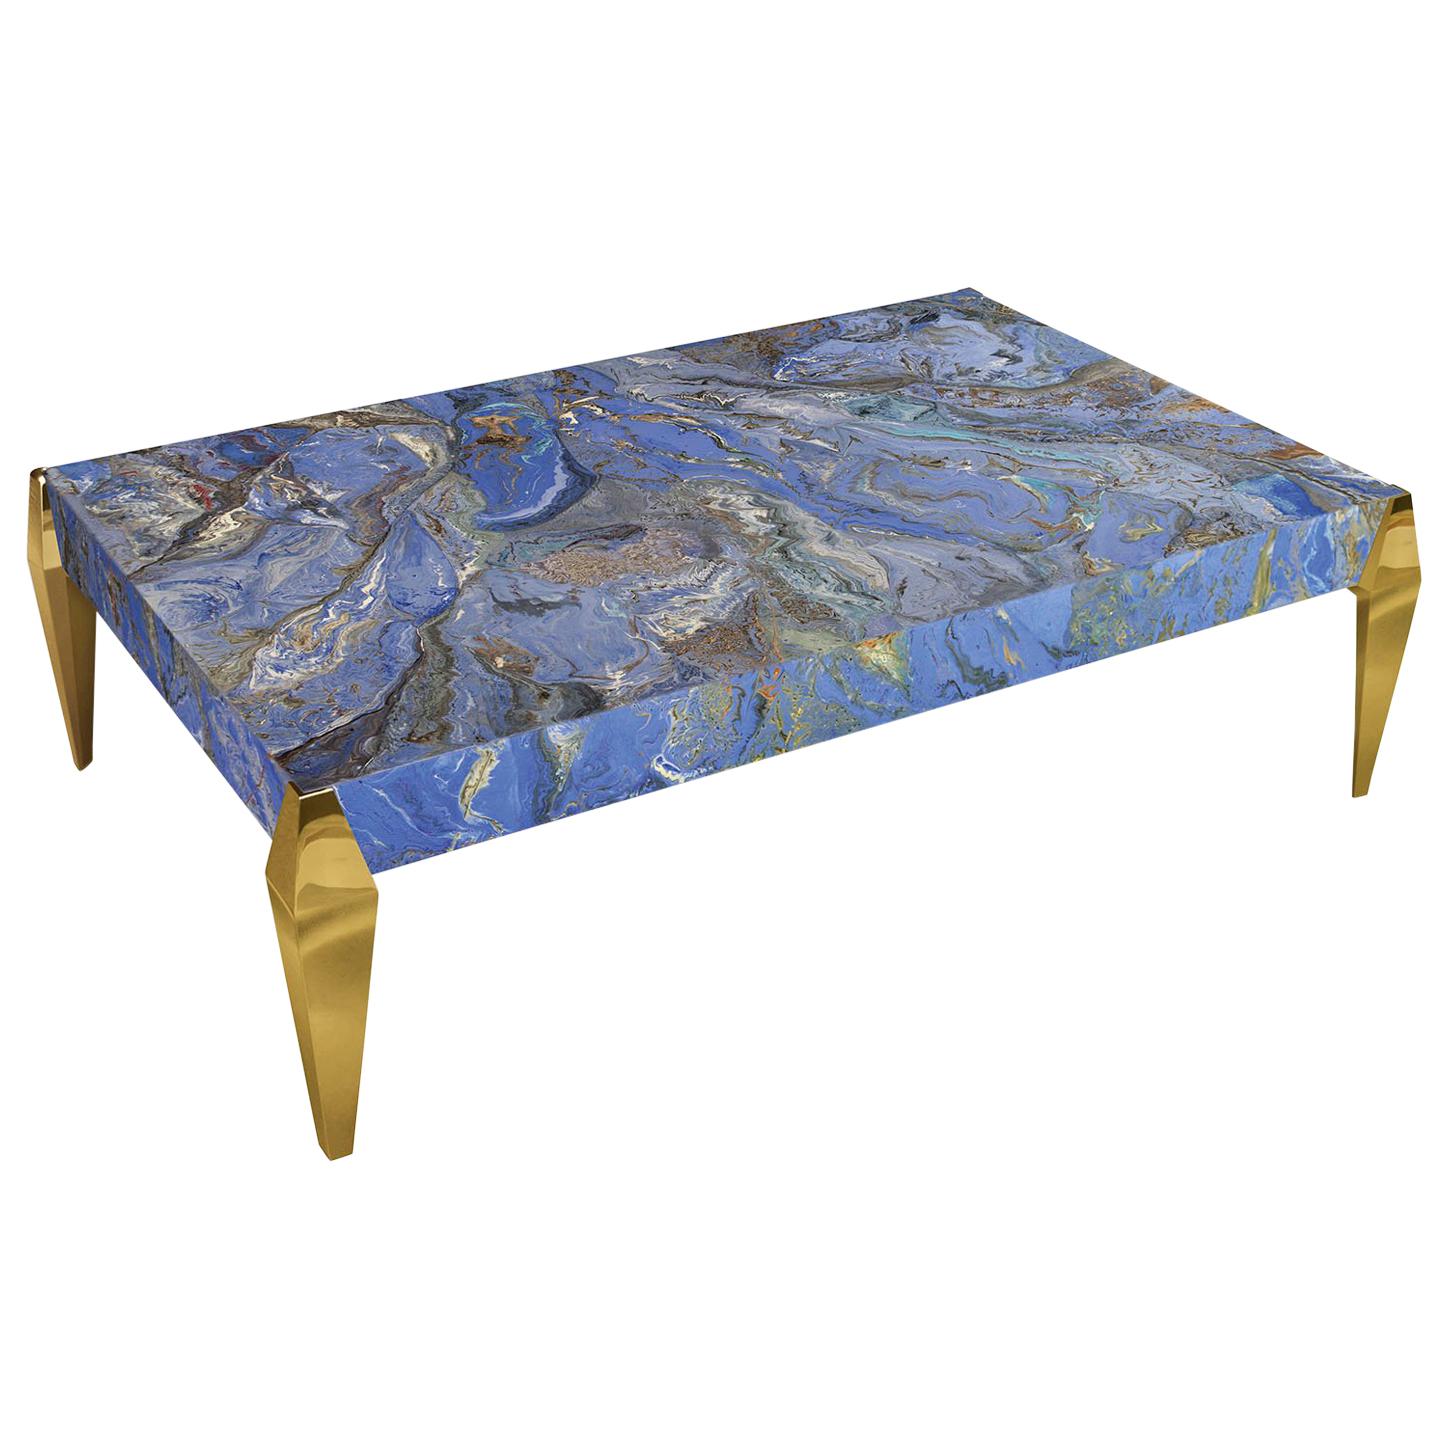 Modern Blue Coffee Table  Marbled Decoration gold leaf wooden Feet made in Italy